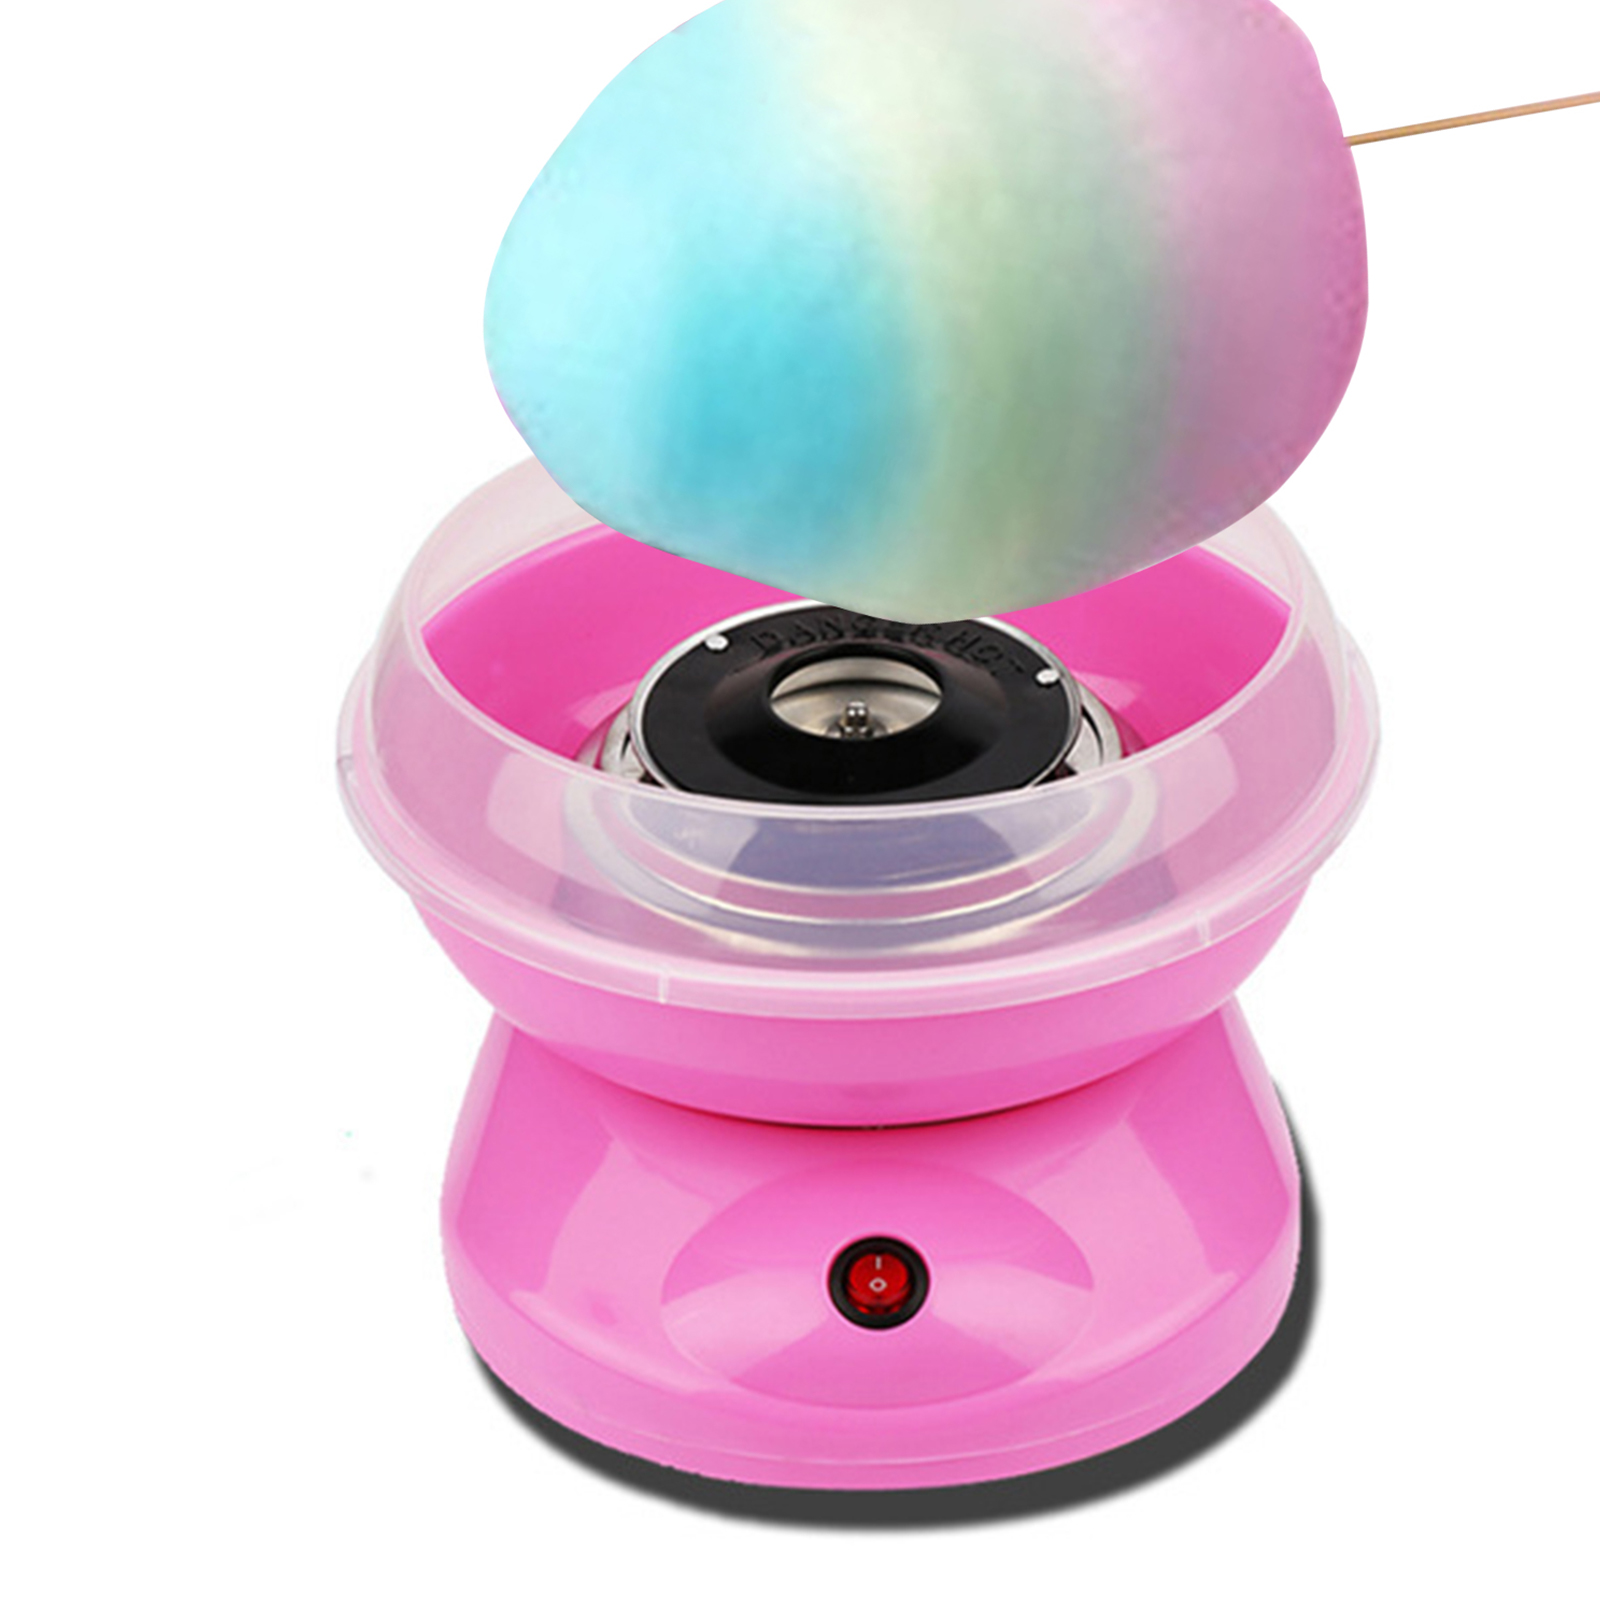 Professional Cotton Sugar Candy Floss Maker Home Kids Party Sweet Gift Useful